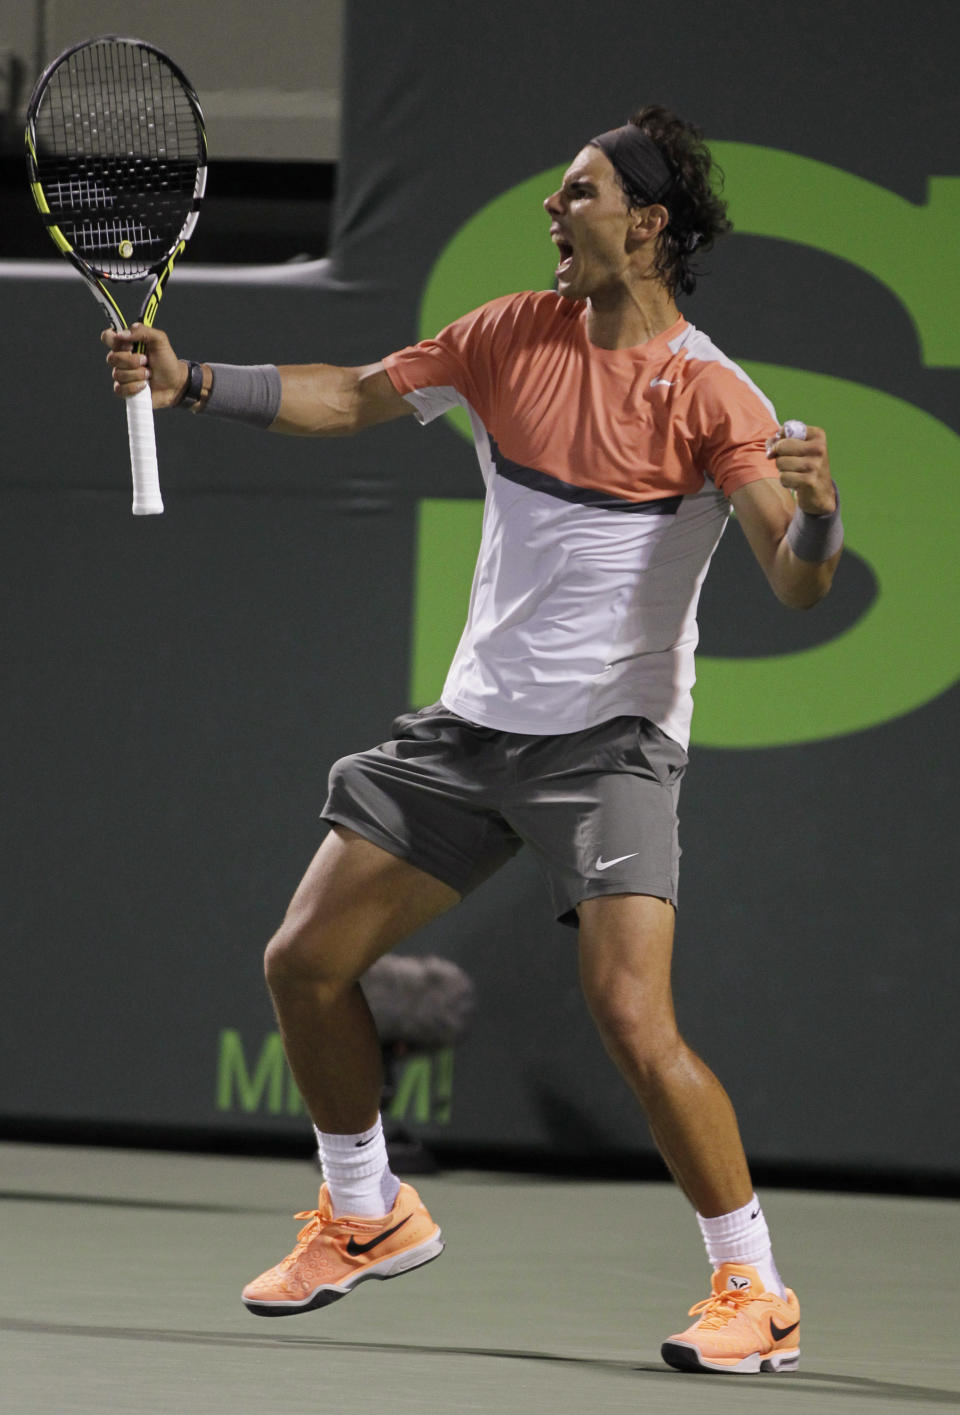 Rafael Nadal, of Spain, celebrates after defeating Milos Raonic, of Canada, 4-6, 6-2, 6-4 during the Sony Open tennis tournament, Thursday, March 27, 2014, in Key Biscayne, Fla. (AP Photo/Luis M. Alvarez)